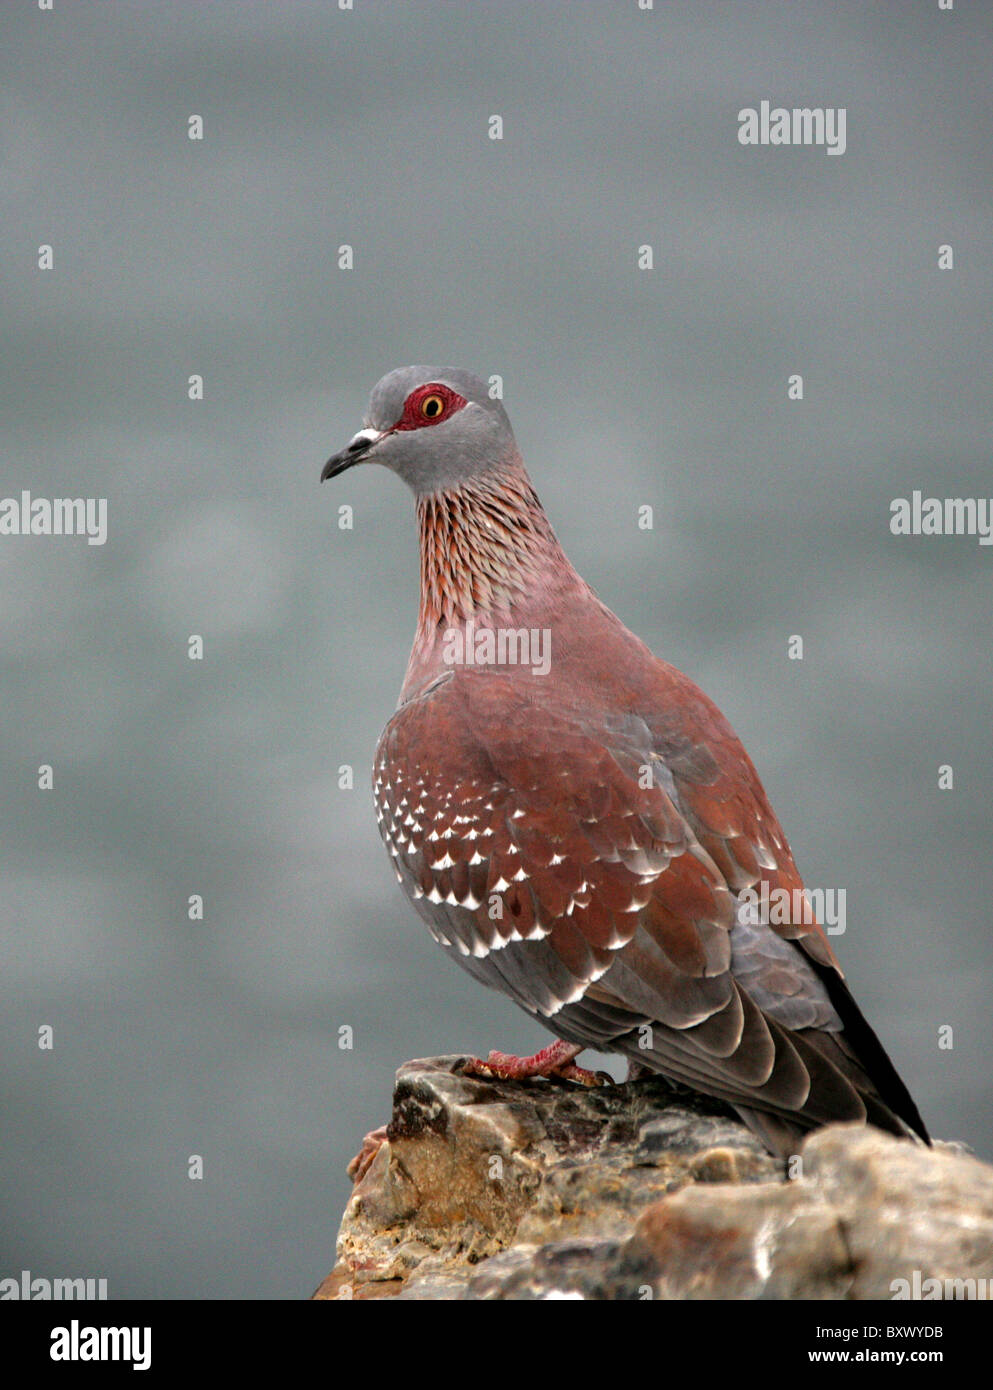 Speckled Pigeon or African Rock Pigeon, Columba guinea, Columbidae. Hermanus, Western Cape, South Africa. Stock Photo